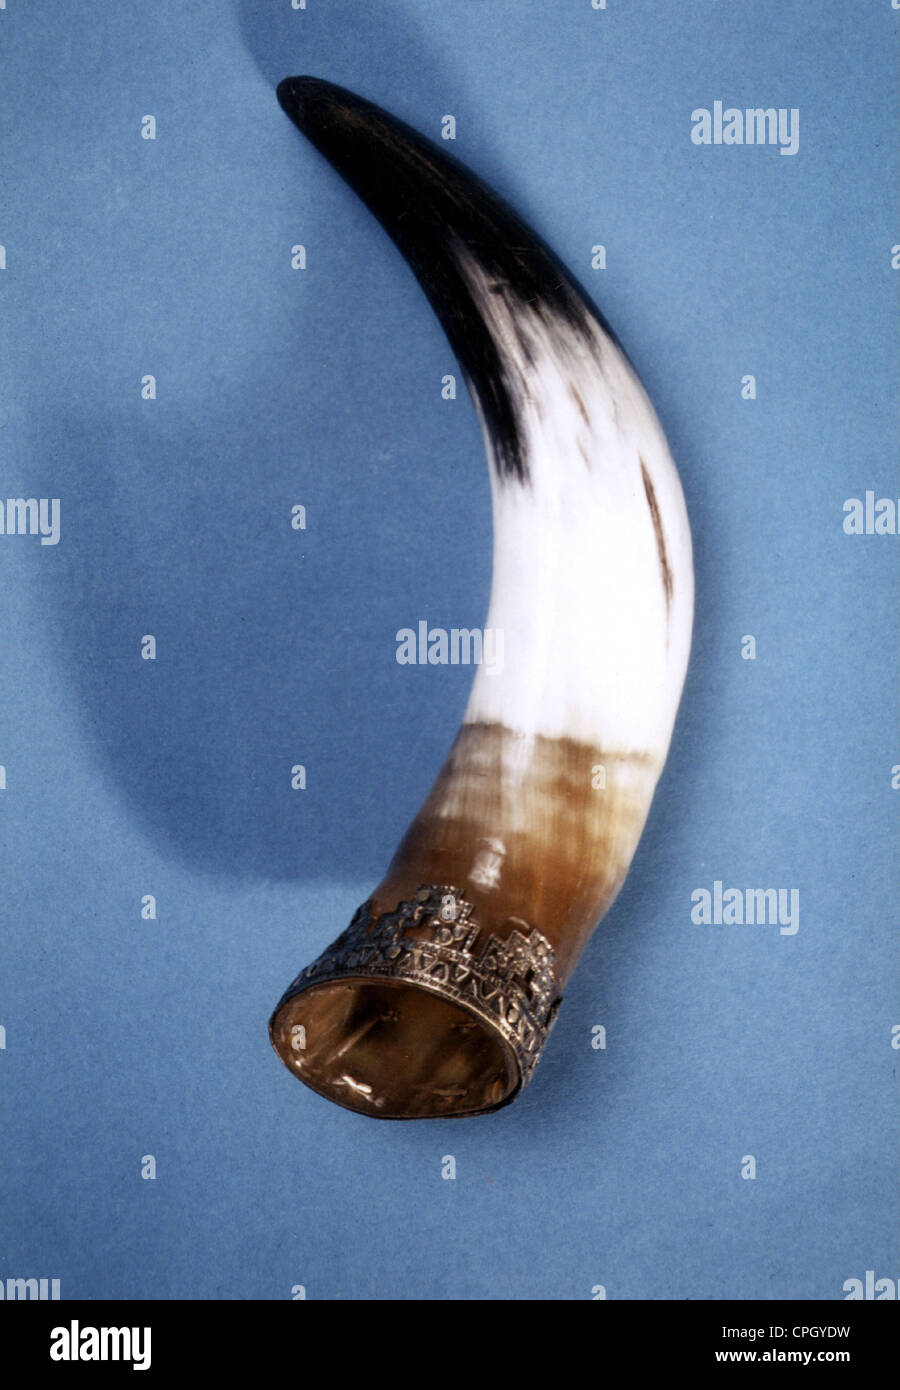 Middle Ages, Vikings, drinking-horn, horn and silver, Birka, Sweden, Statens Historiska Museum, Stockholm, historic, historical, Viking, alcohol, drinking vessel, drinking vessels, medieval, Additional-Rights-Clearences-Not Available Stock Photo